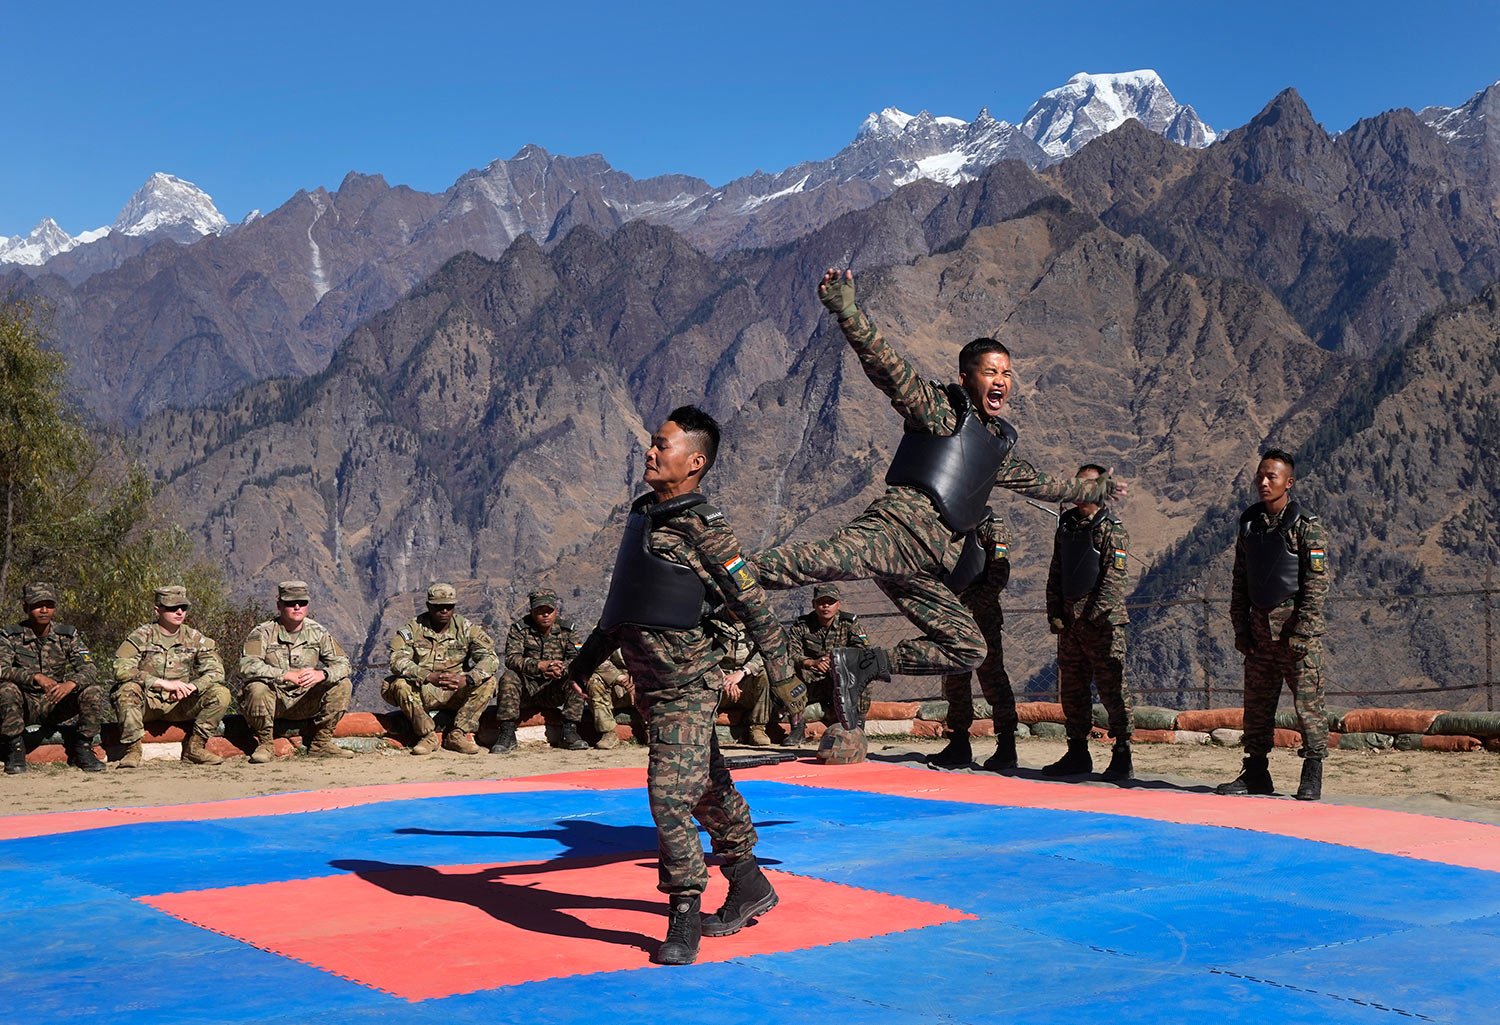  US army soldiers of 2nd Brigade of the 11th Airborne Division watch Indian army soldiers display their unarmed combat skills during the Indo-US joint exercise or "Yudh Abhyas, in Auli, in the Indian state of Uttarakhand, Tuesday, Nov. 29, 2022. (AP 